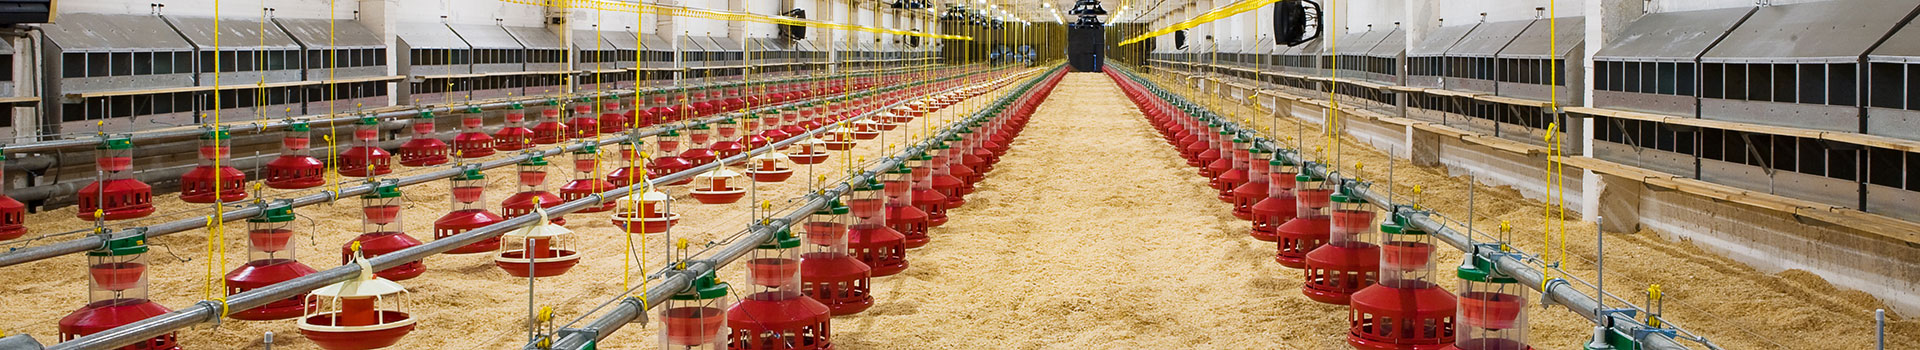 poultry facility